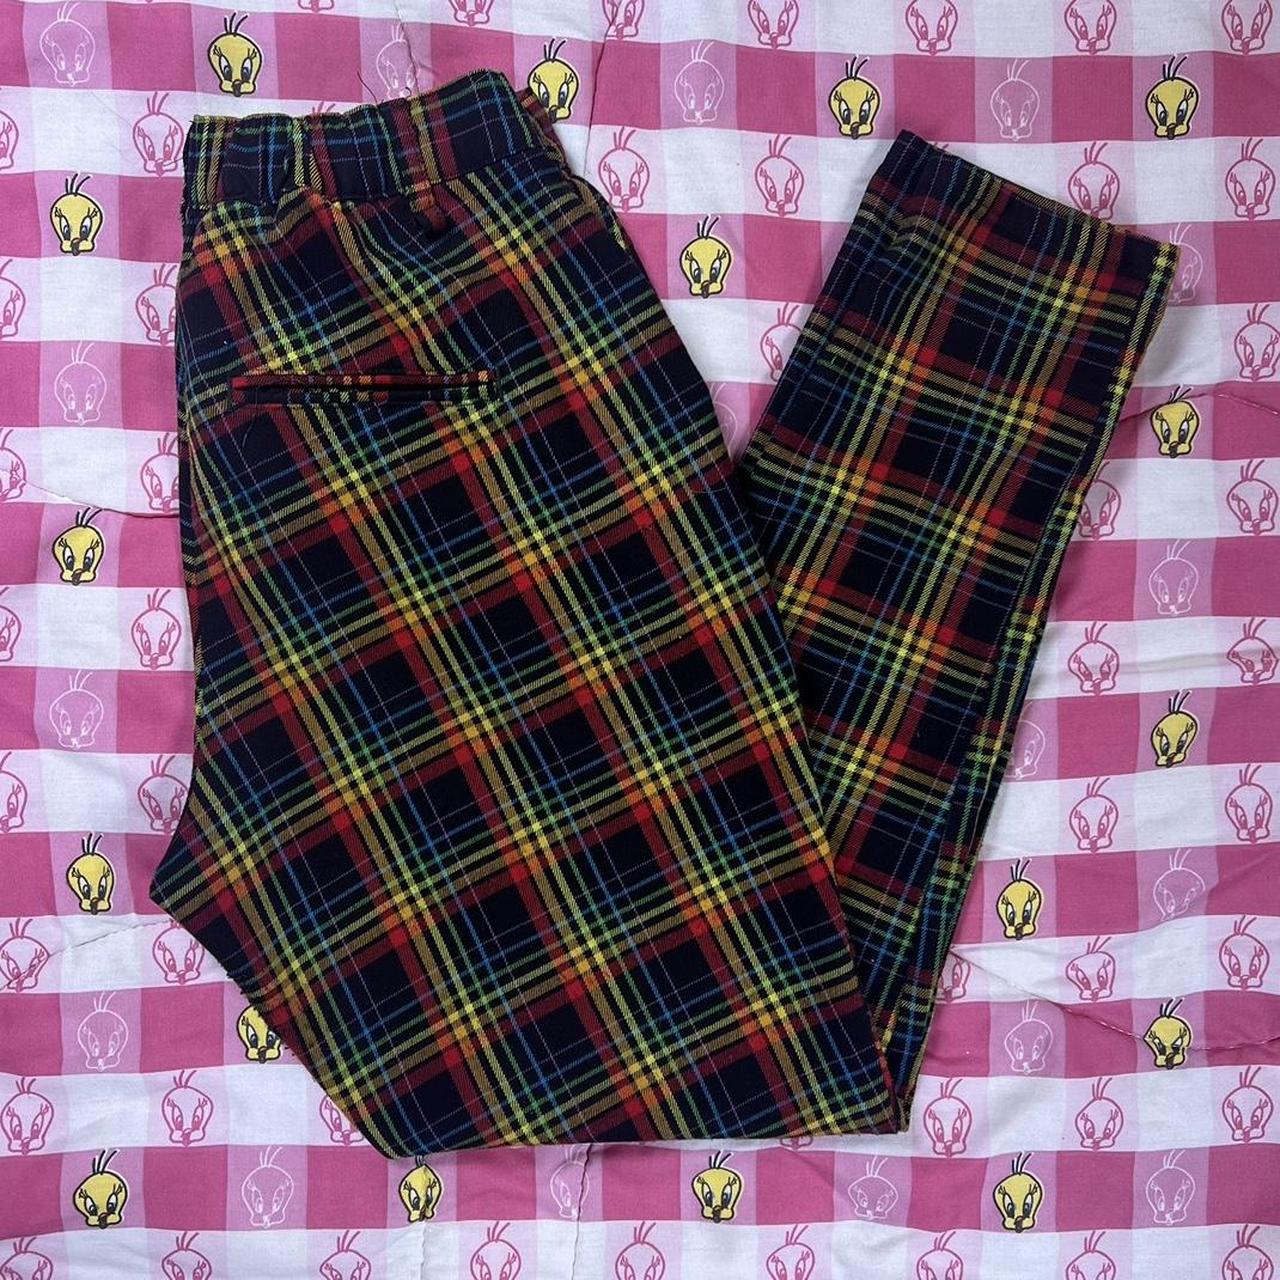 Hot topic rainbow plaid skinny pants. These are so - Depop